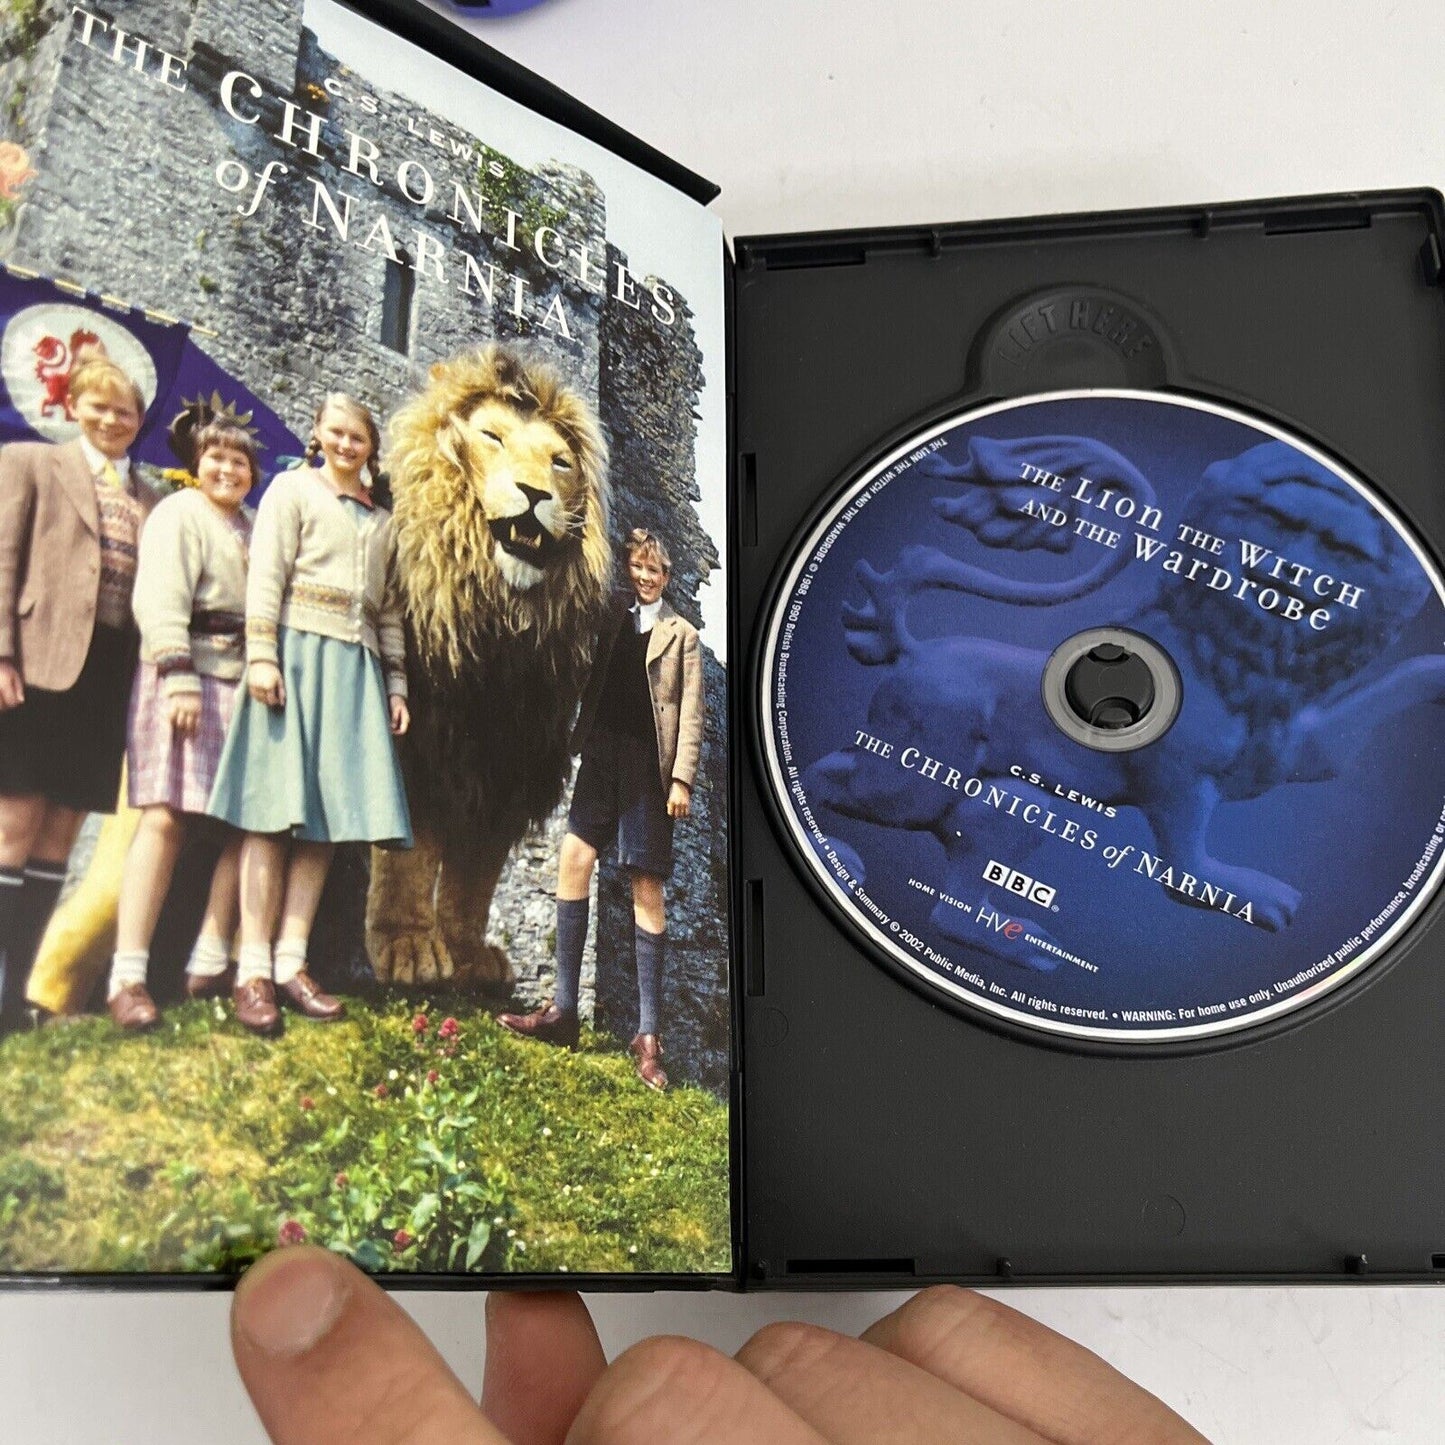 C.S. Lewis: The Chronicles Of Narnia (DVD, 1990, 3-Disc) BBC All Regions